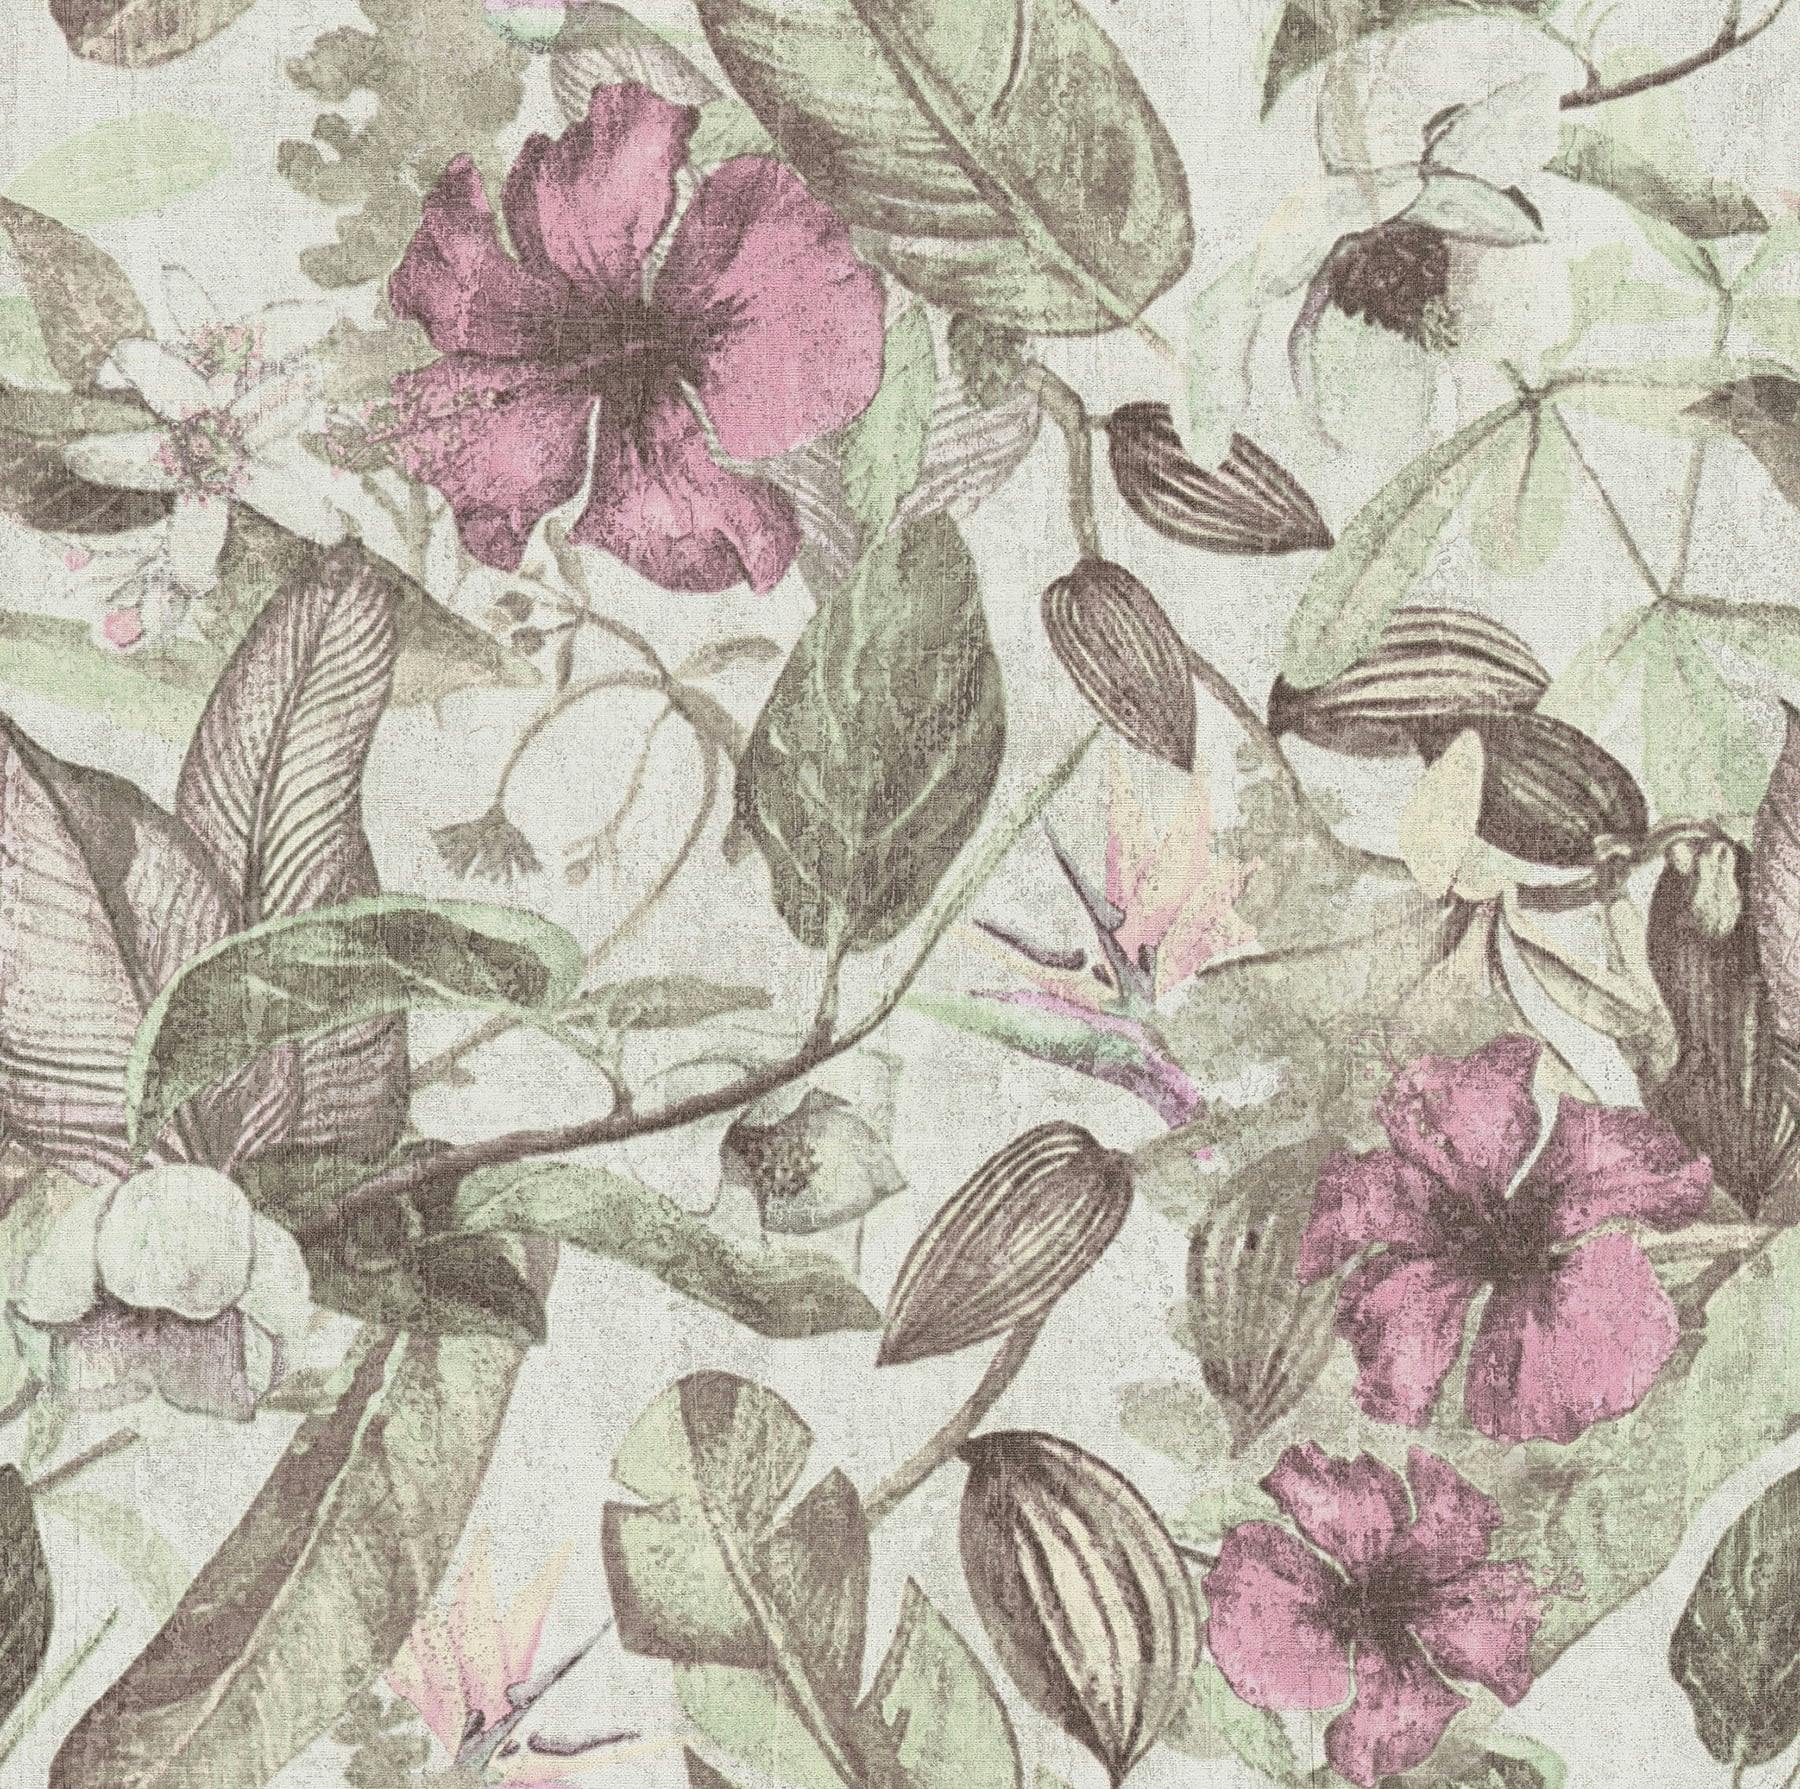 Romantic Vintage Floral Non-Woven Wallpaper in Pastel Pink and Green